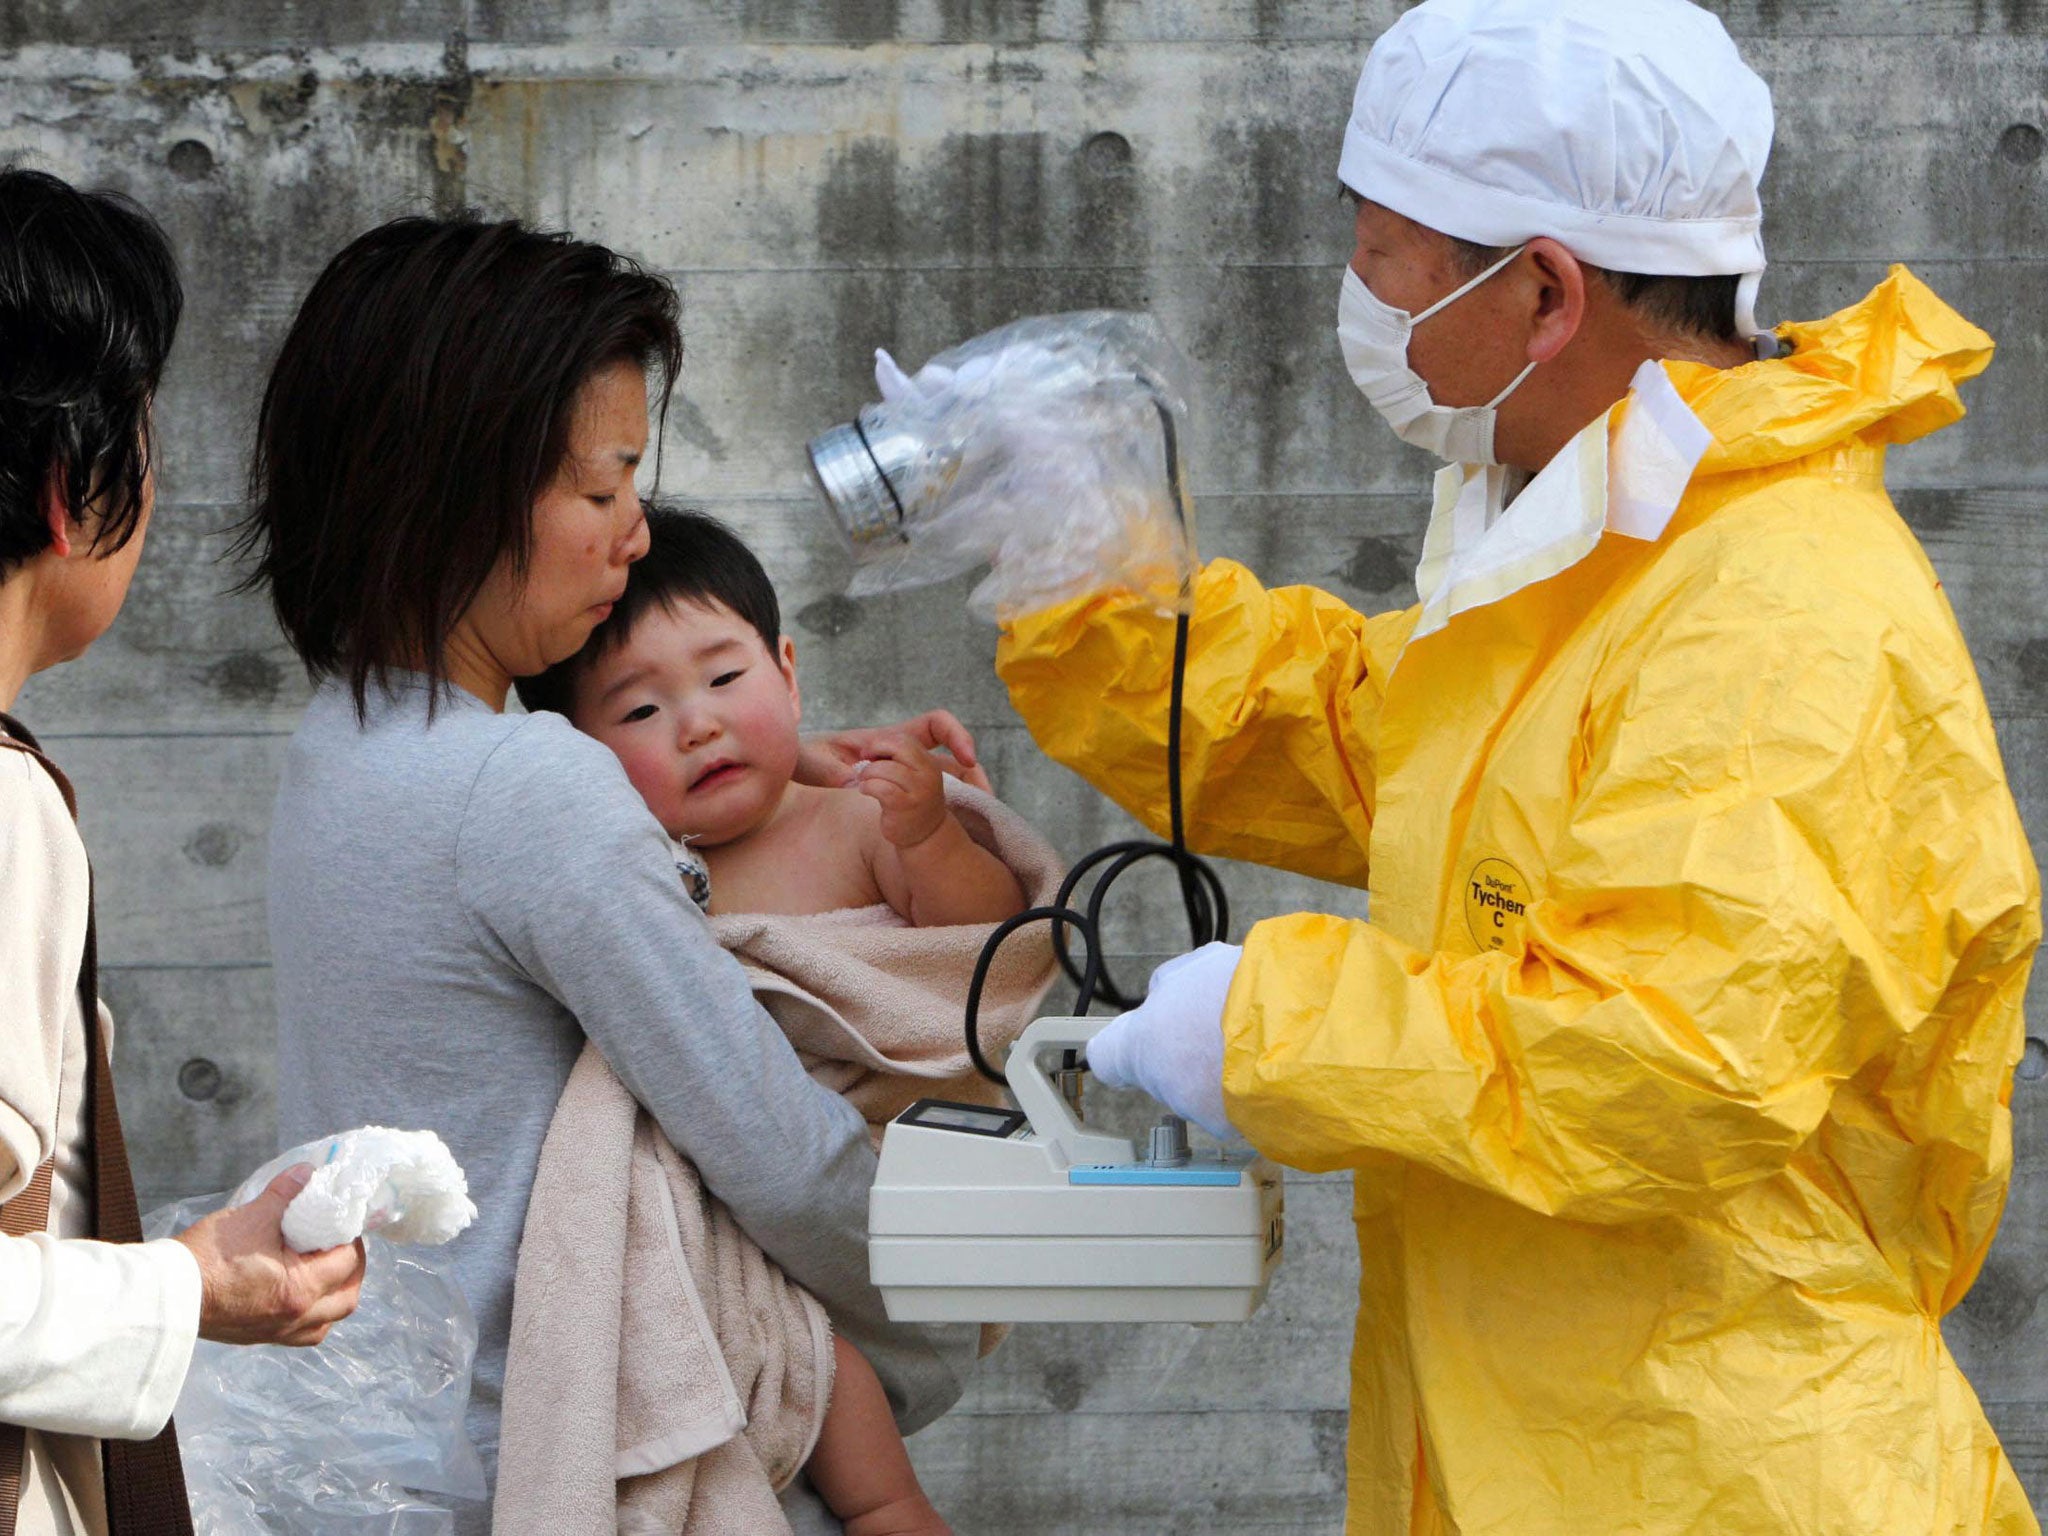 A child is tested for radiation after the accident in March 2011